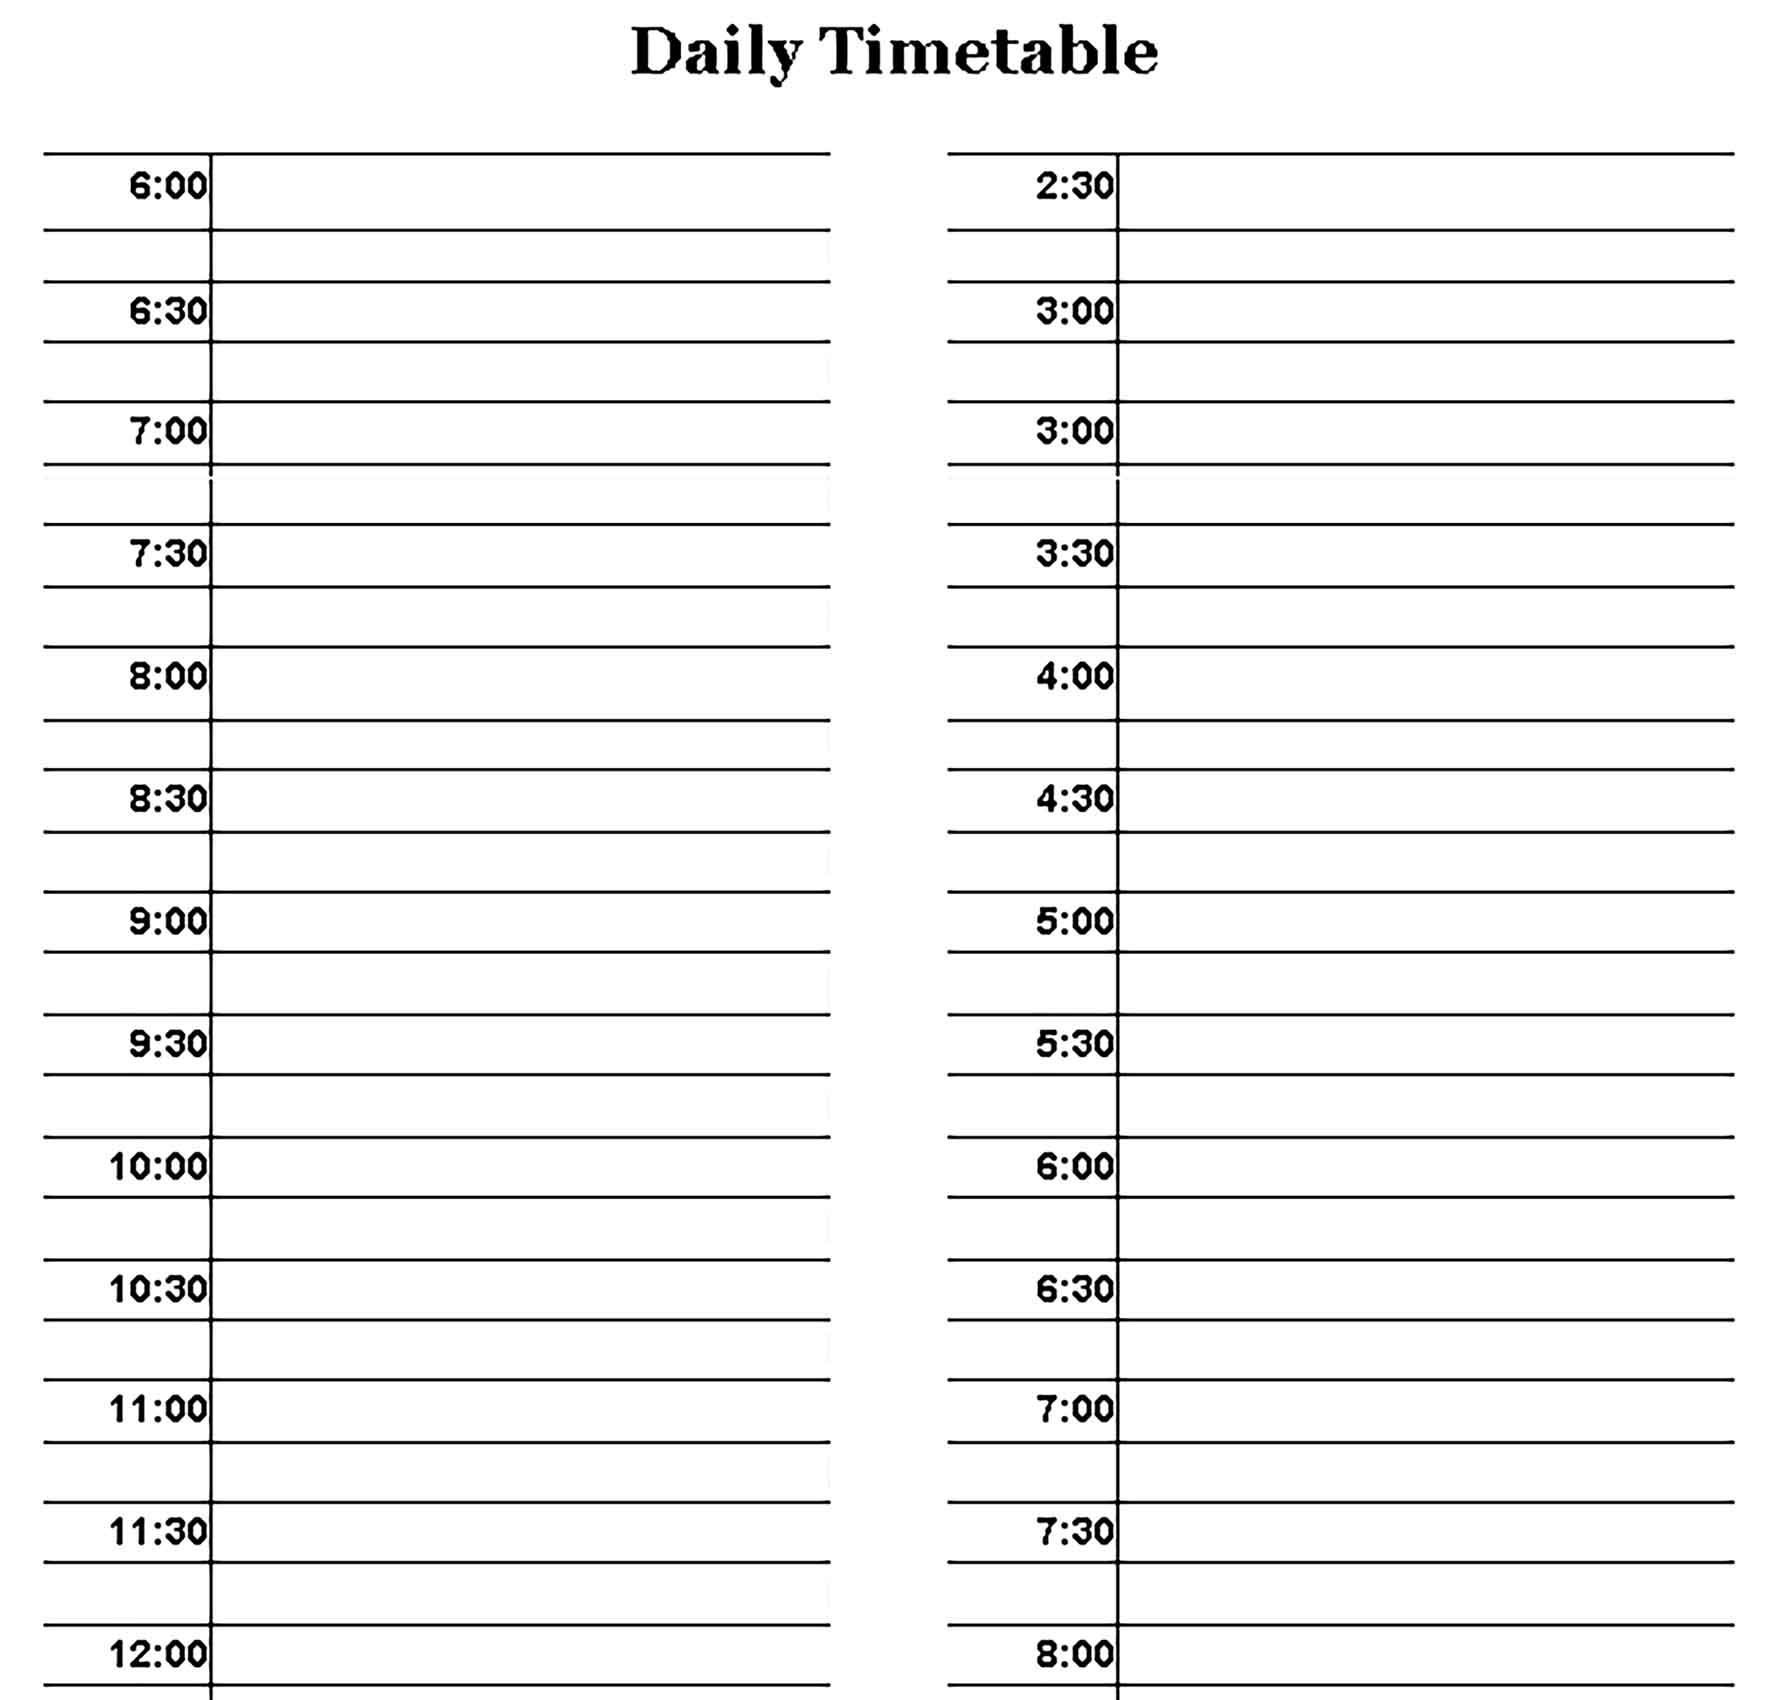 Template Family Daily Timetable Sample